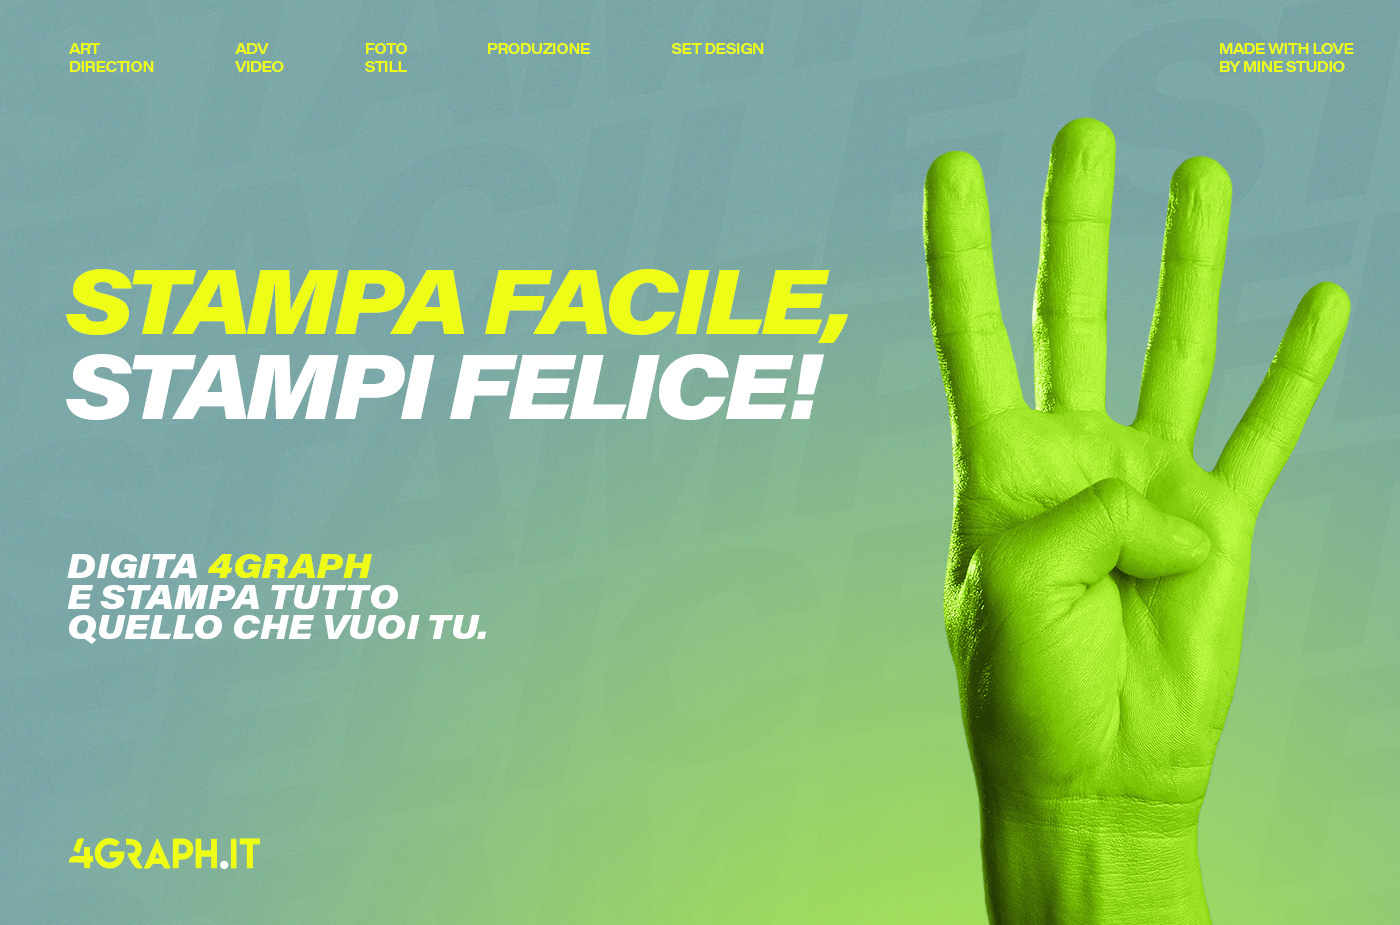 campaign online press print video visual effect Advertising  green pubblicita stampa online